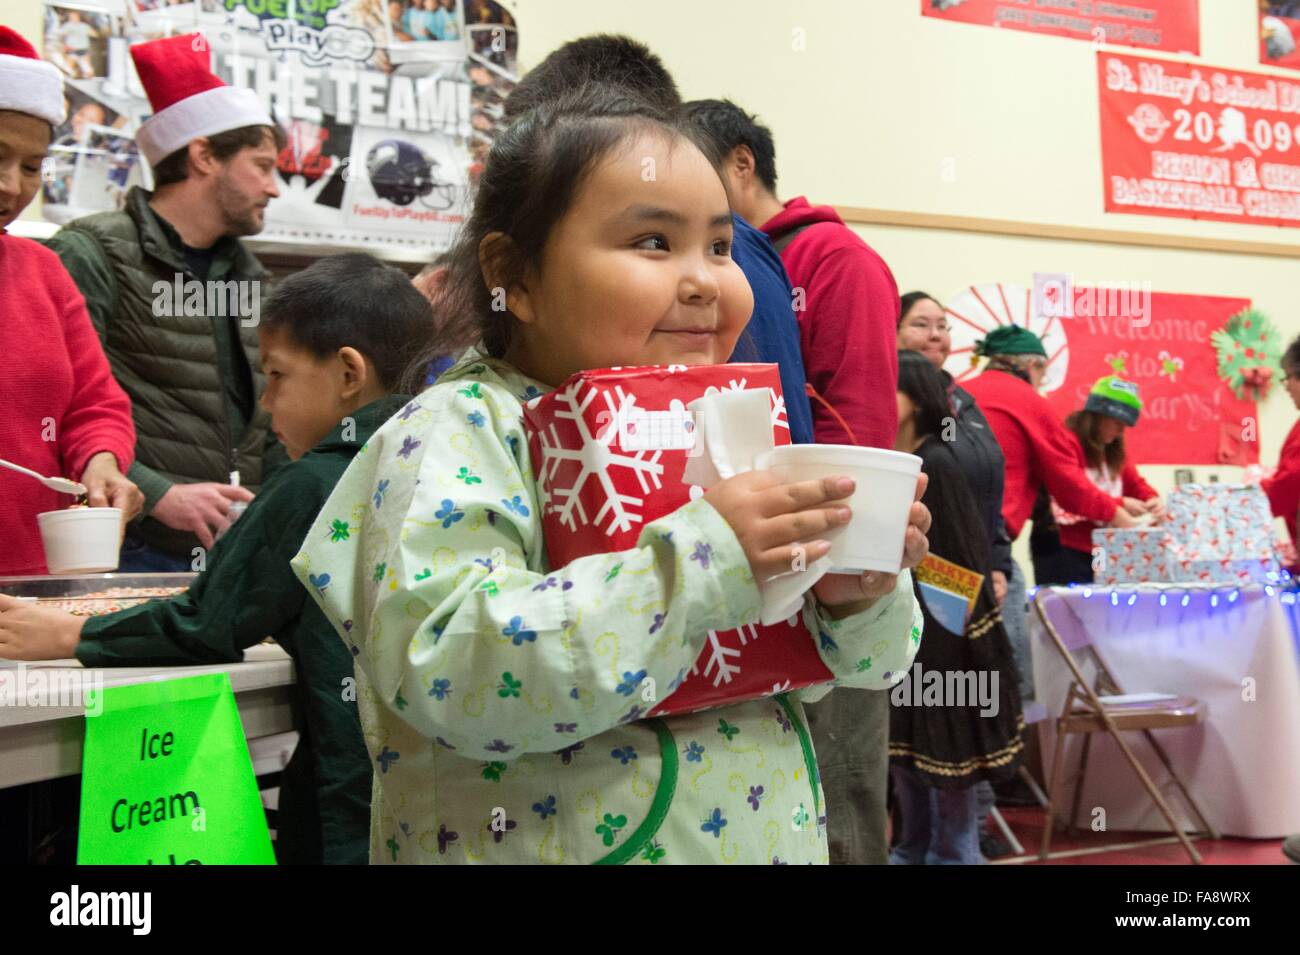 A young Native Alaskan girl smiles after receiving presents and ice cream from volunteers during Operation Santa Claus December 5, 2015 in St. Mary's, Alaska. The program has been held for 59 years and brings Christmas cheer to underserved, remote villages across Alaska. Stock Photo